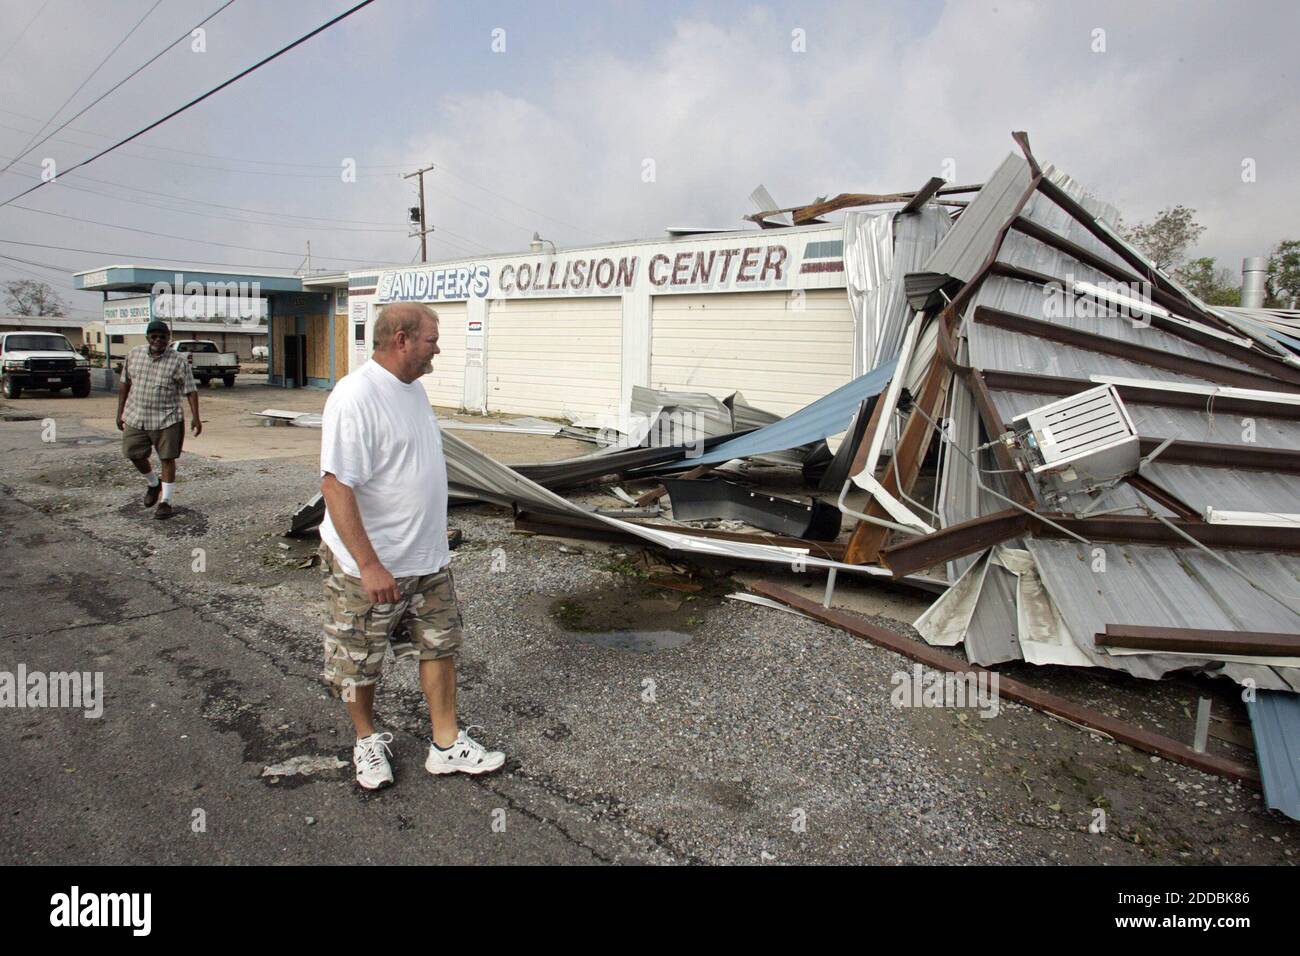 NO FILM, NO VIDEO, NO TV, NO DOCUMENTARY - Michael Sandifer gets his first look at the severe damage Hurricane Rita caused to his business, Sandifer's Collission Center, in Port Arthur, Texas, on September 25, 2005. Photo by Raul Ribieira/Miami Herald/KRT/ABACAPRESS.COM Stock Photo